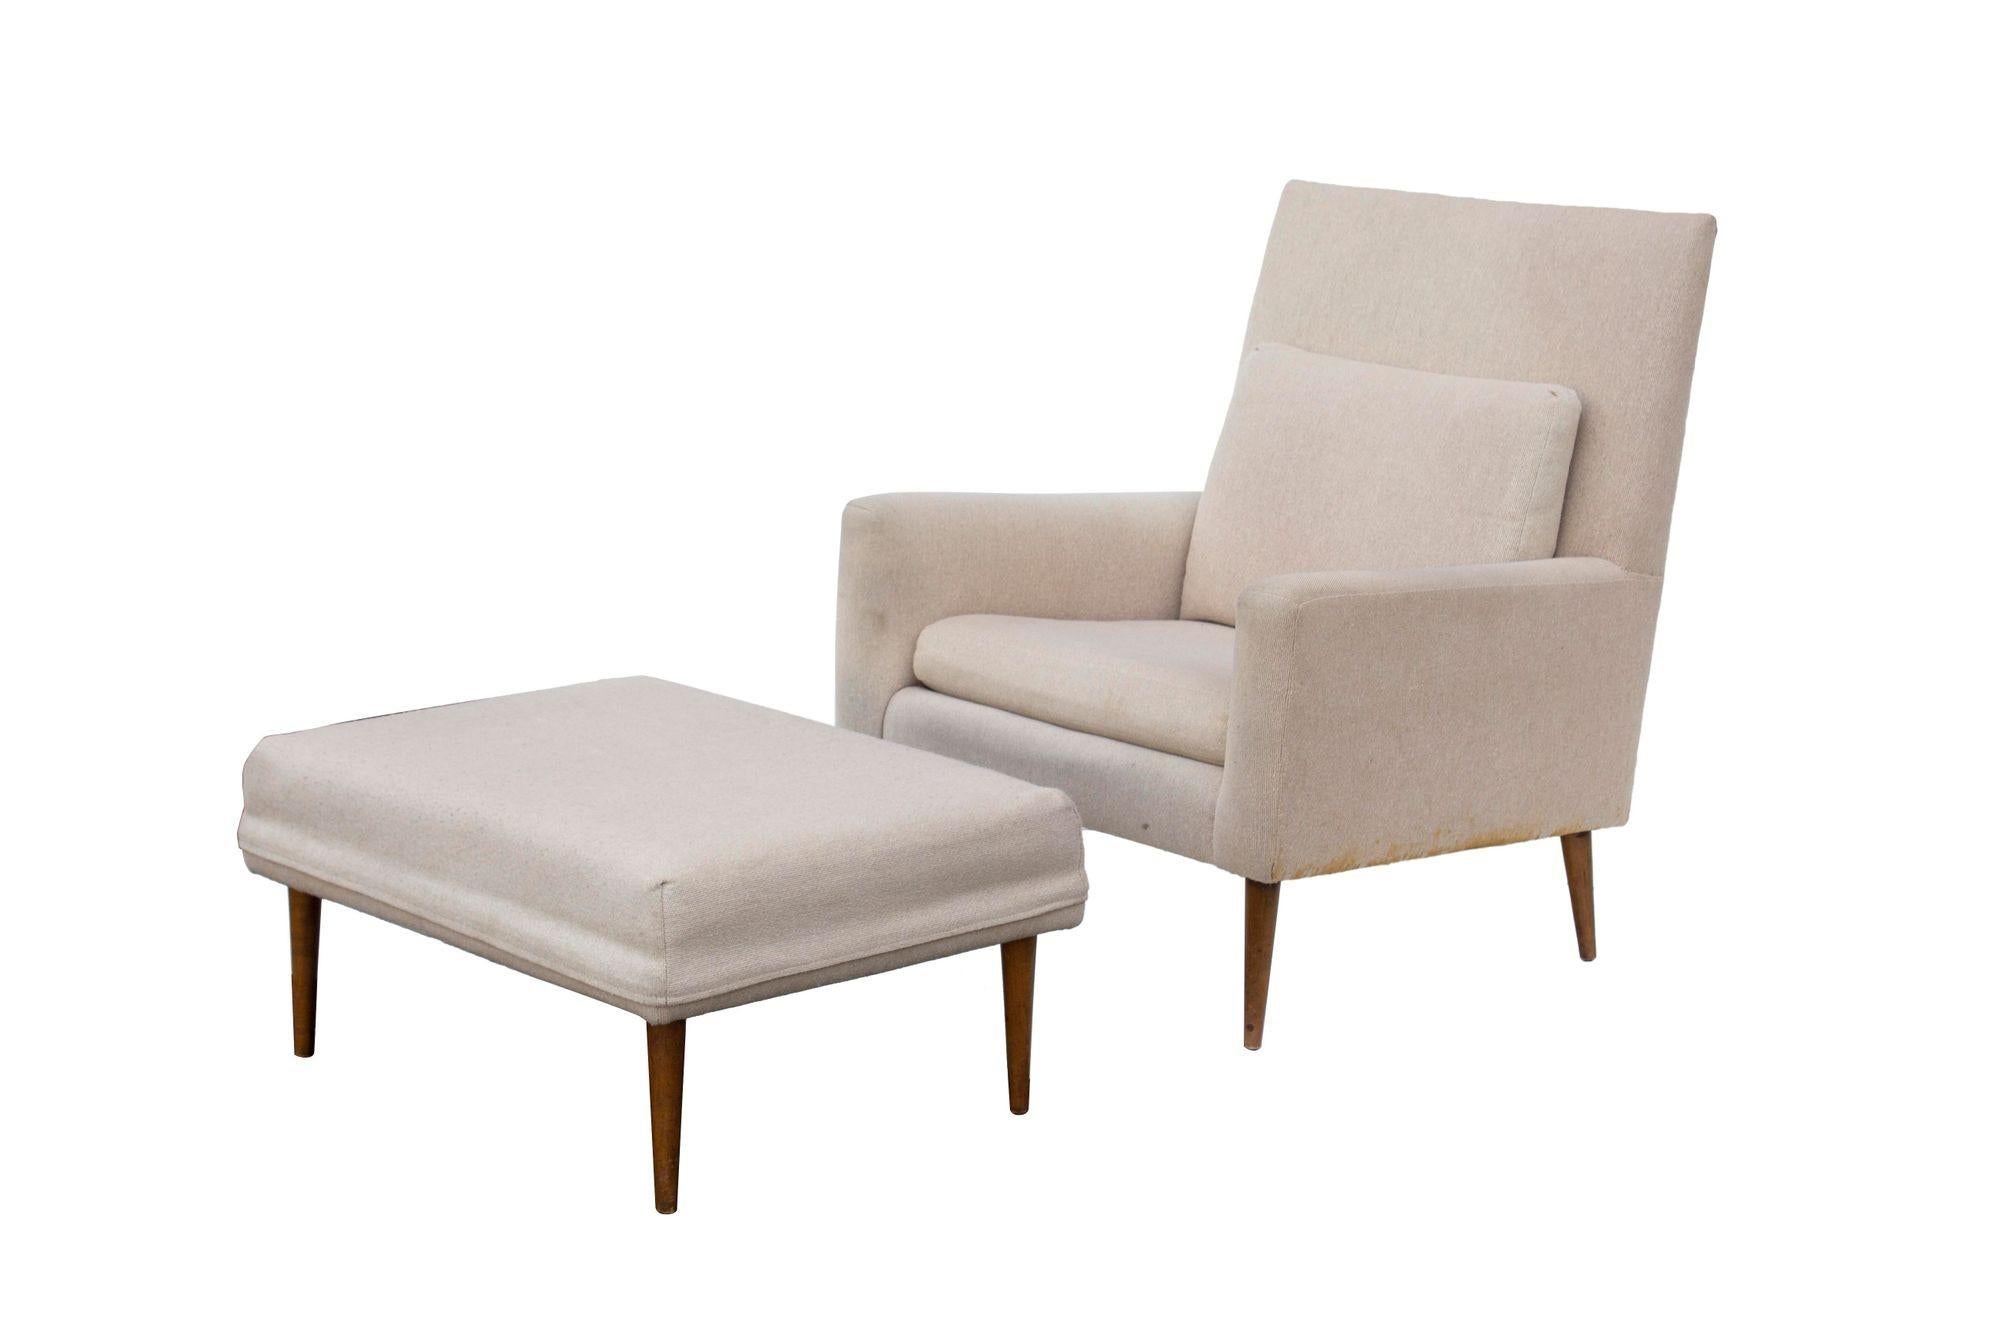 Paul McCobb Lounge Chair Model 302 and Matching Ottoman by Directional 6